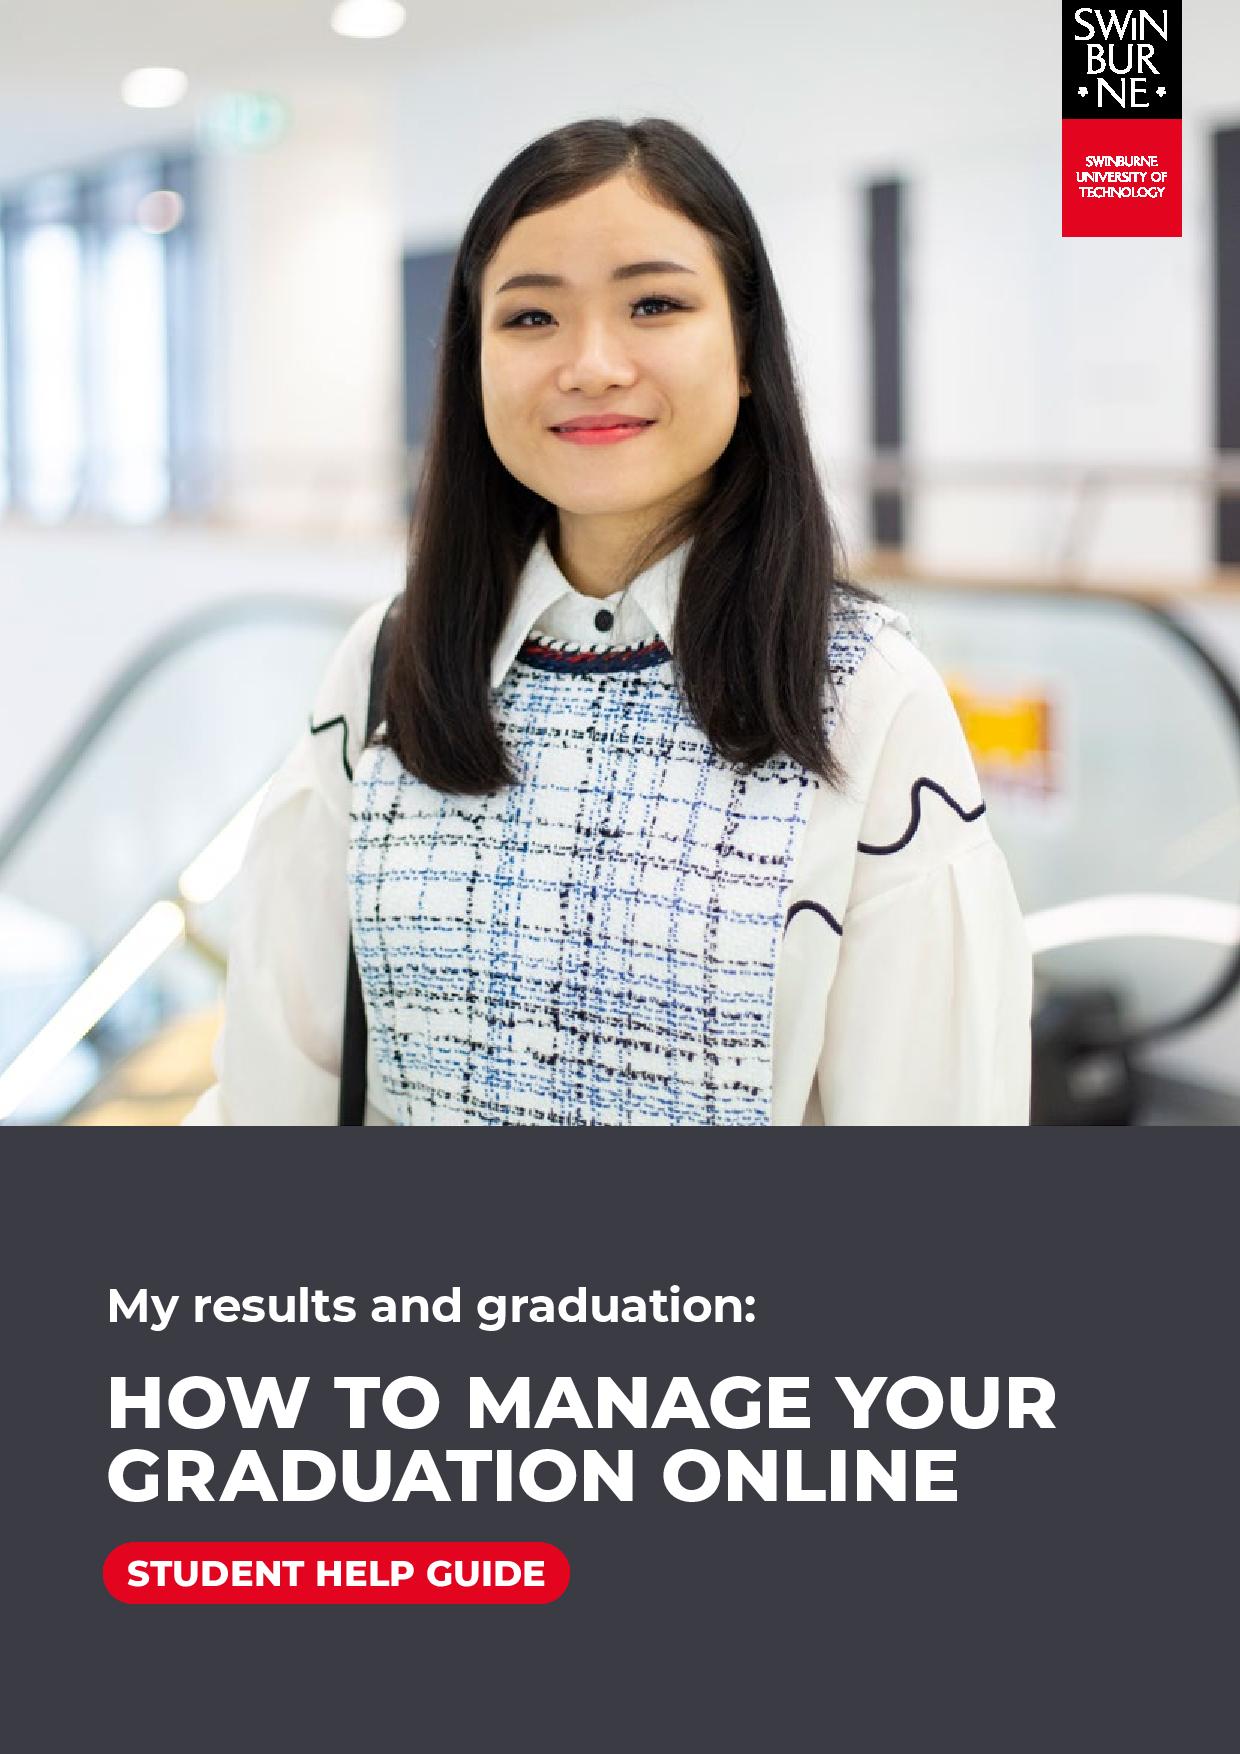 My results and graduation: How to manage your graduation online